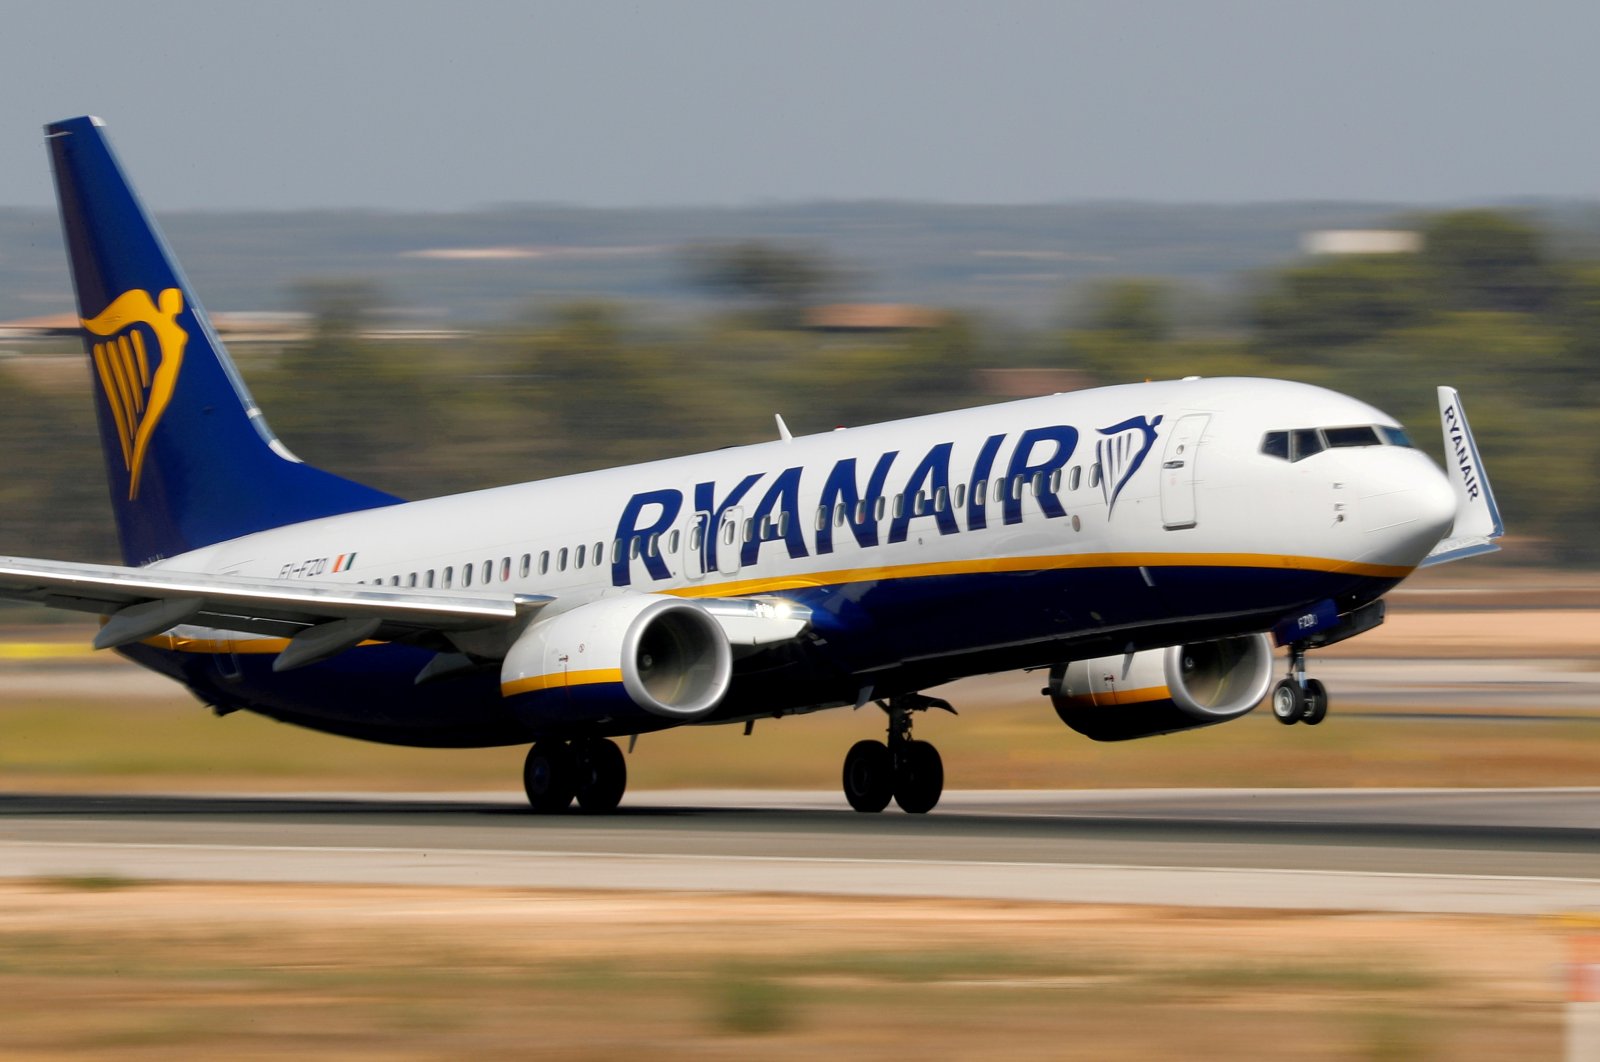 A Ryanair Boeing 737-800 airplane takes off from the airport in Palma de Mallorca, Spain, July 29, 2018.  (Reuters Photo)